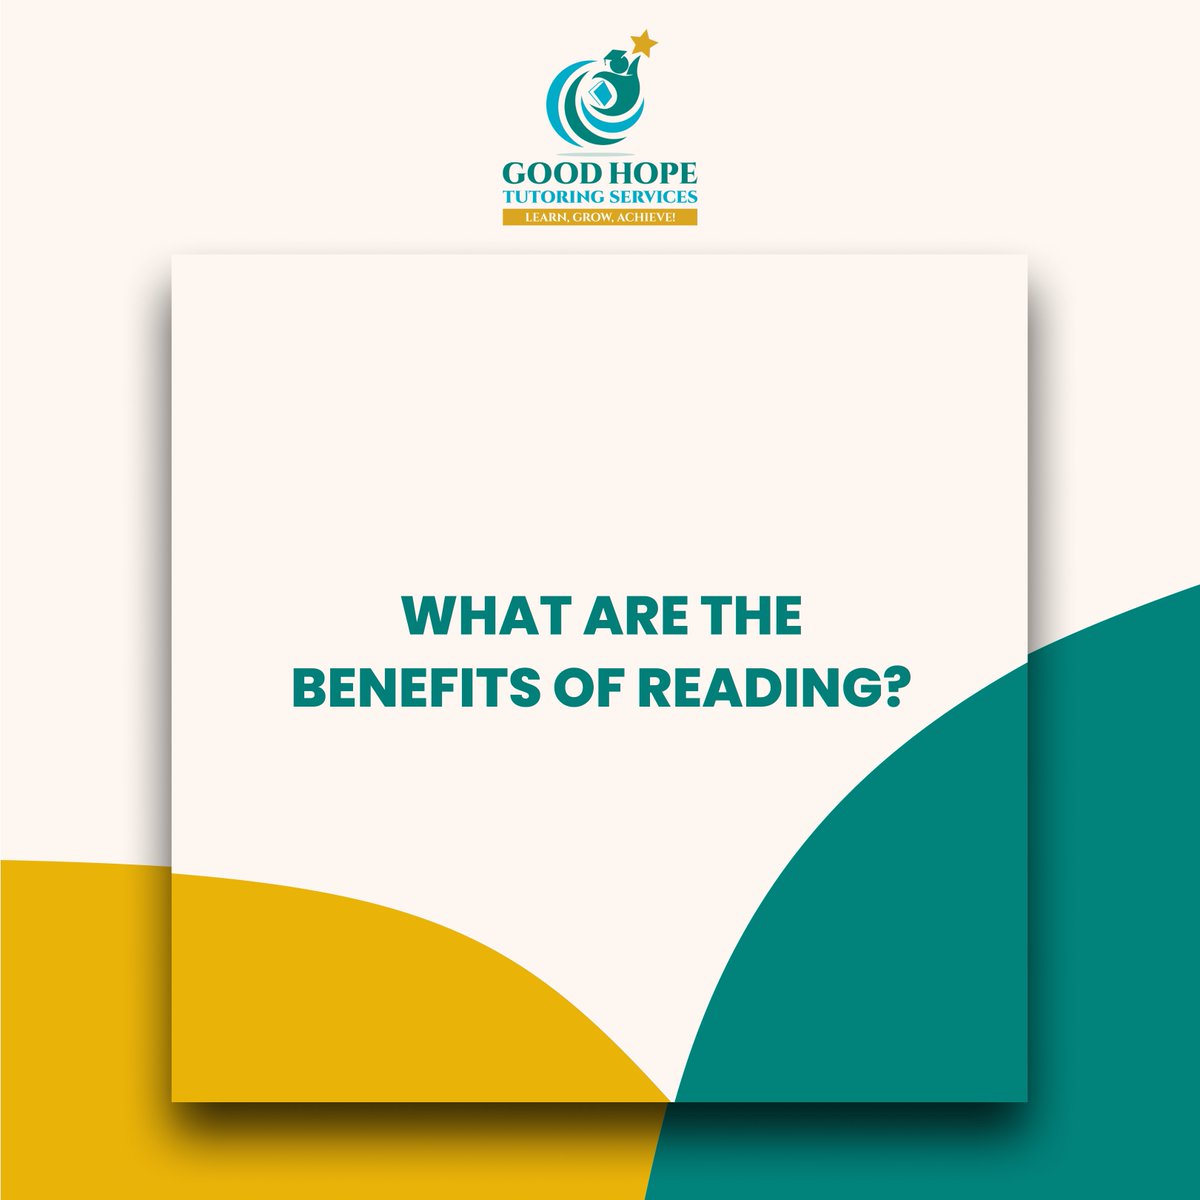 📖 Reading comprehension struggles? Our tutors use innovative techniques to improve comprehension skills and foster a love for reading! Get ready to dive into the world of books! #ReadingRocks #TutoringMagic